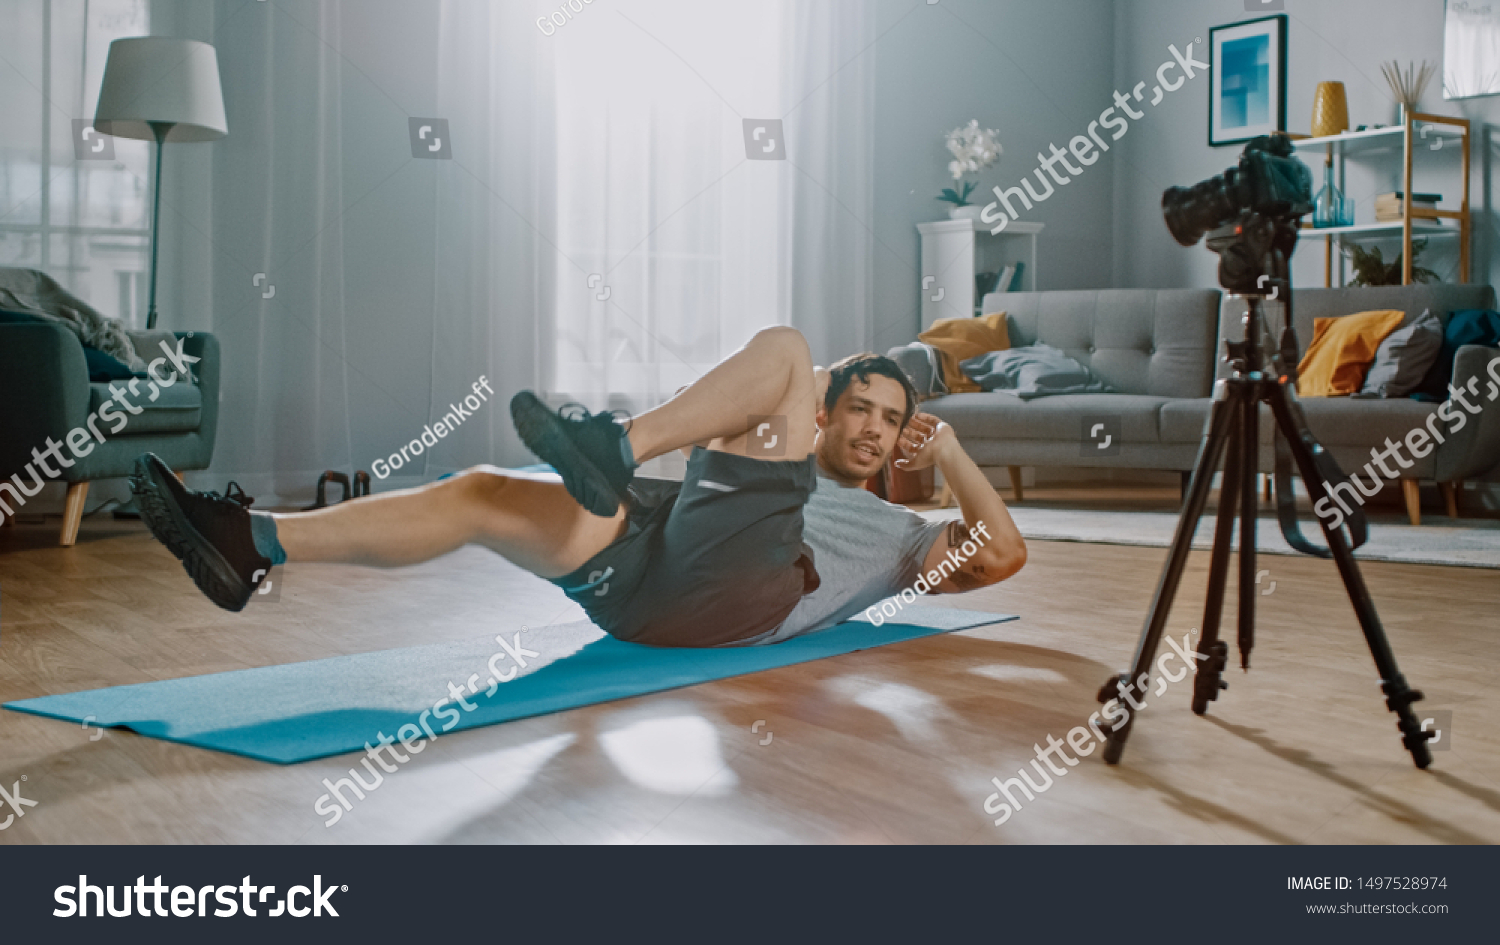 Strong Athletic Fit Man in T-shirt and Shorts is Recording his Crisscross Crunch Workout on Camera for His Blog. Scene takes place in His Spacious and Bright Living Room with Minimalistic Interior. #1497528974